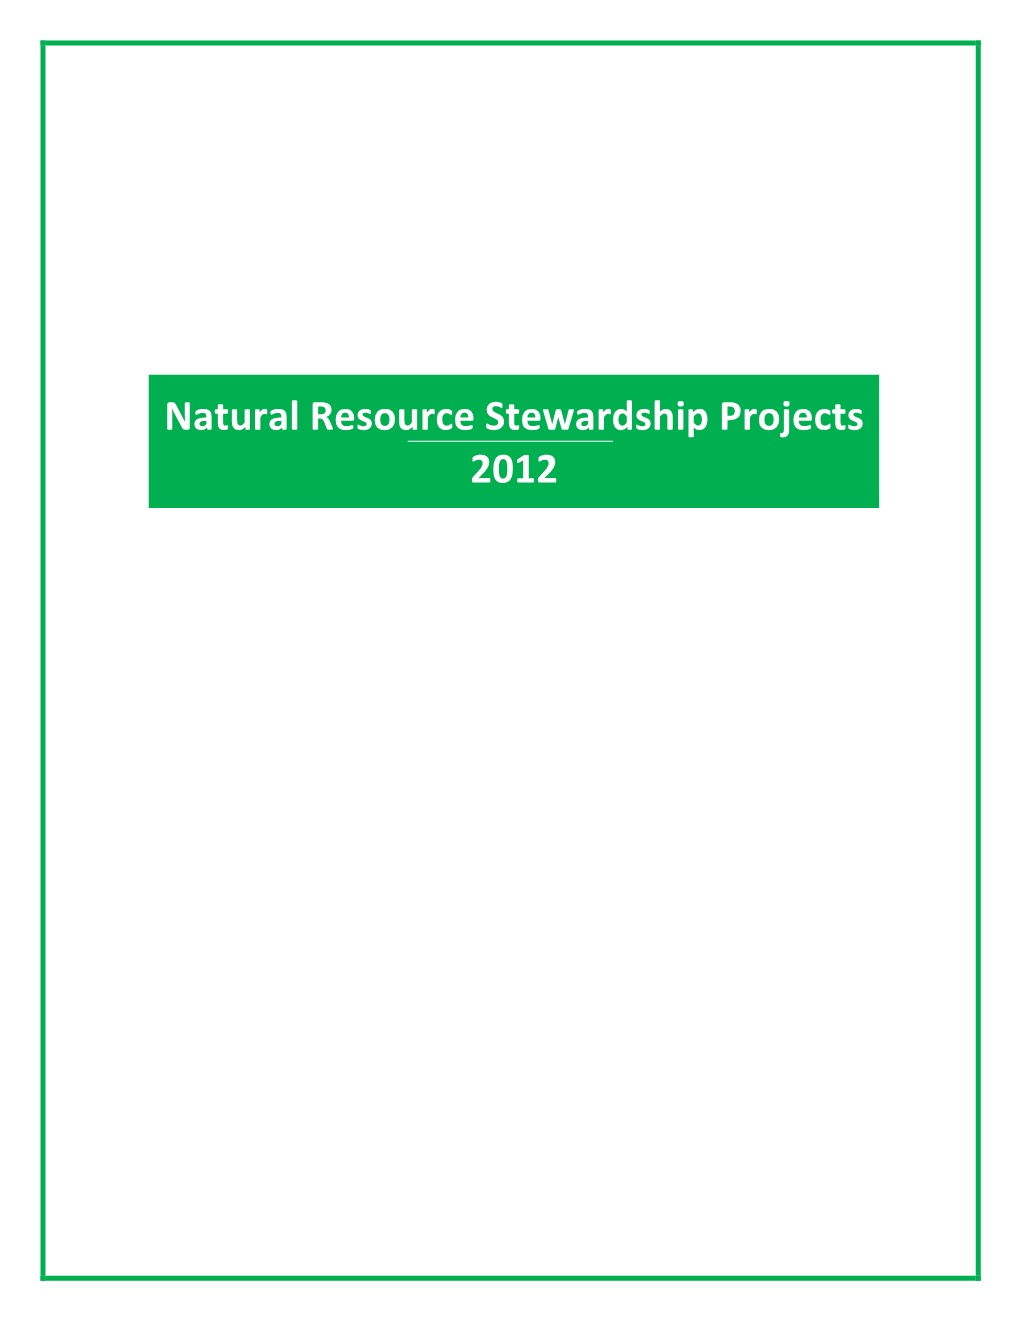 Natural Resource Stewardship Projects 2012